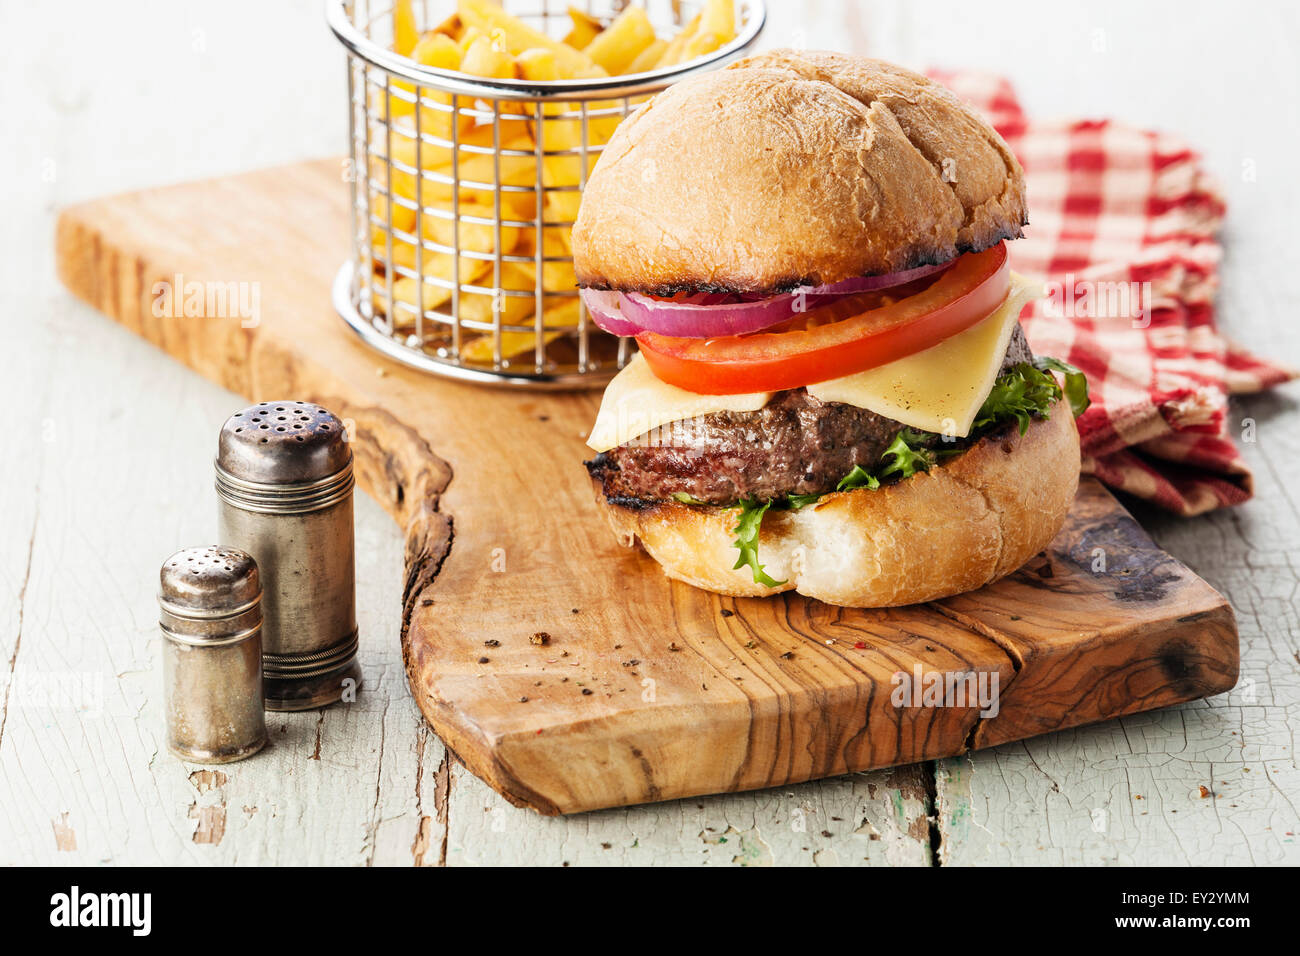 Burger with meat and French fries in basket on wooden background Stock Photo